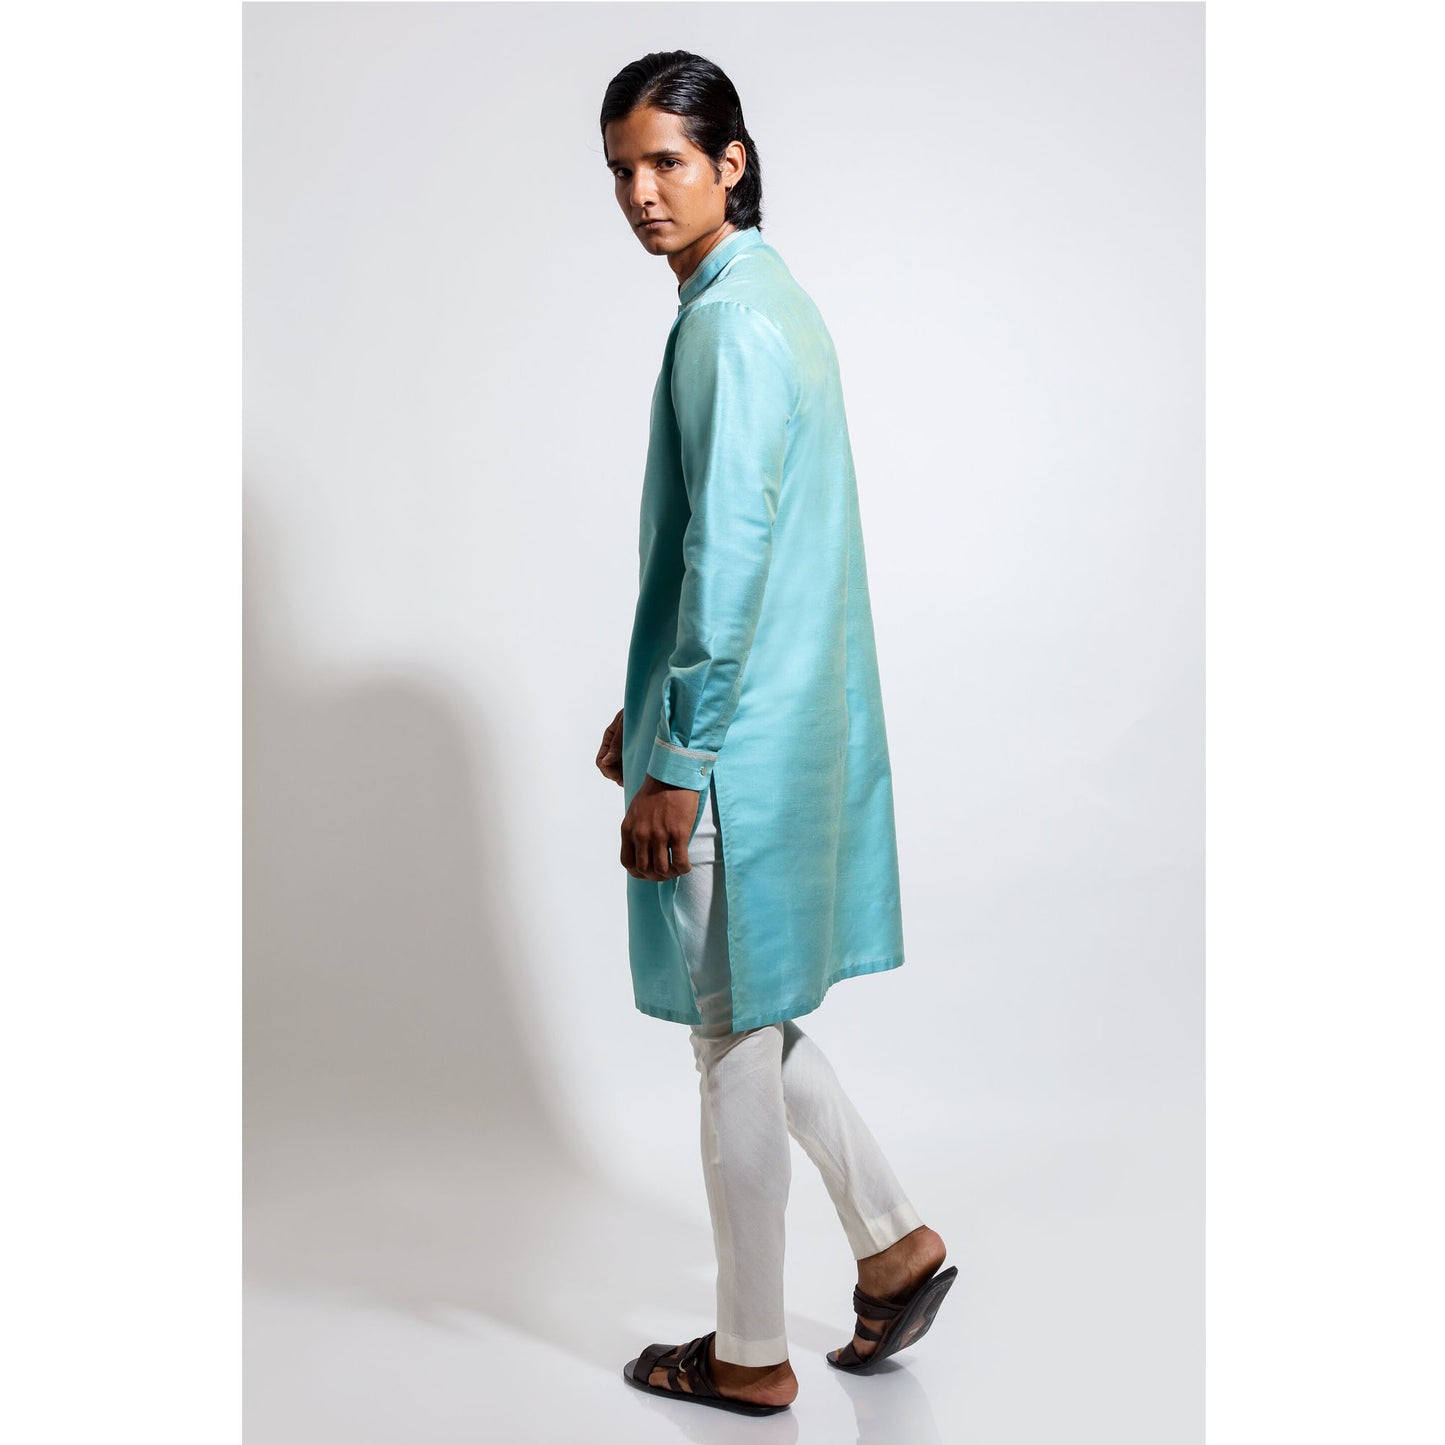 Long kurta with lotus embroidery around front placket